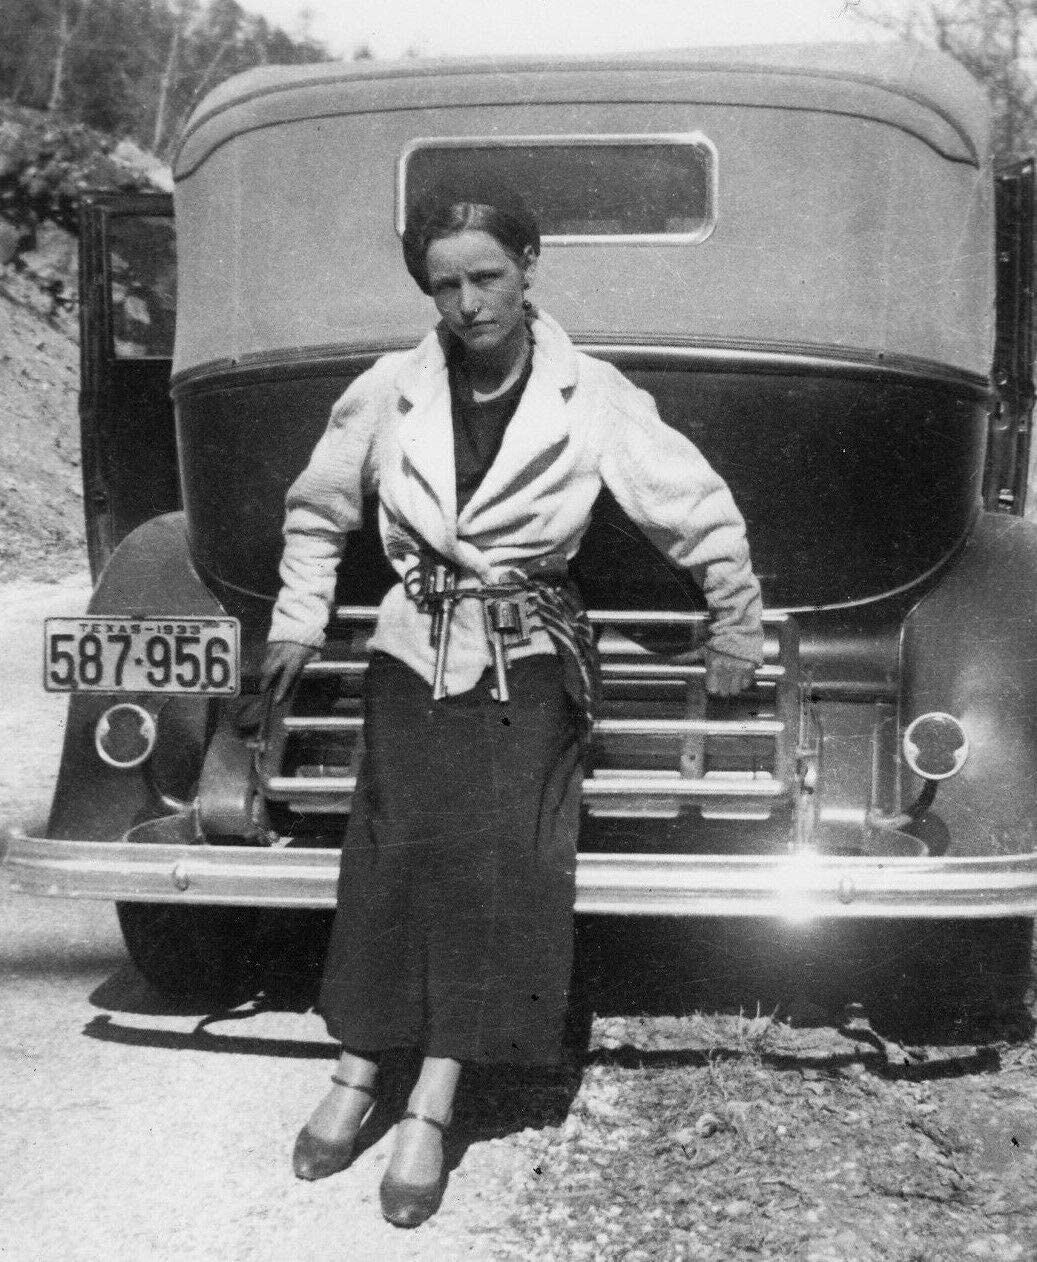 Bonnie Parker and Car, Capone, Mob vintage photo reproduction High quality 014